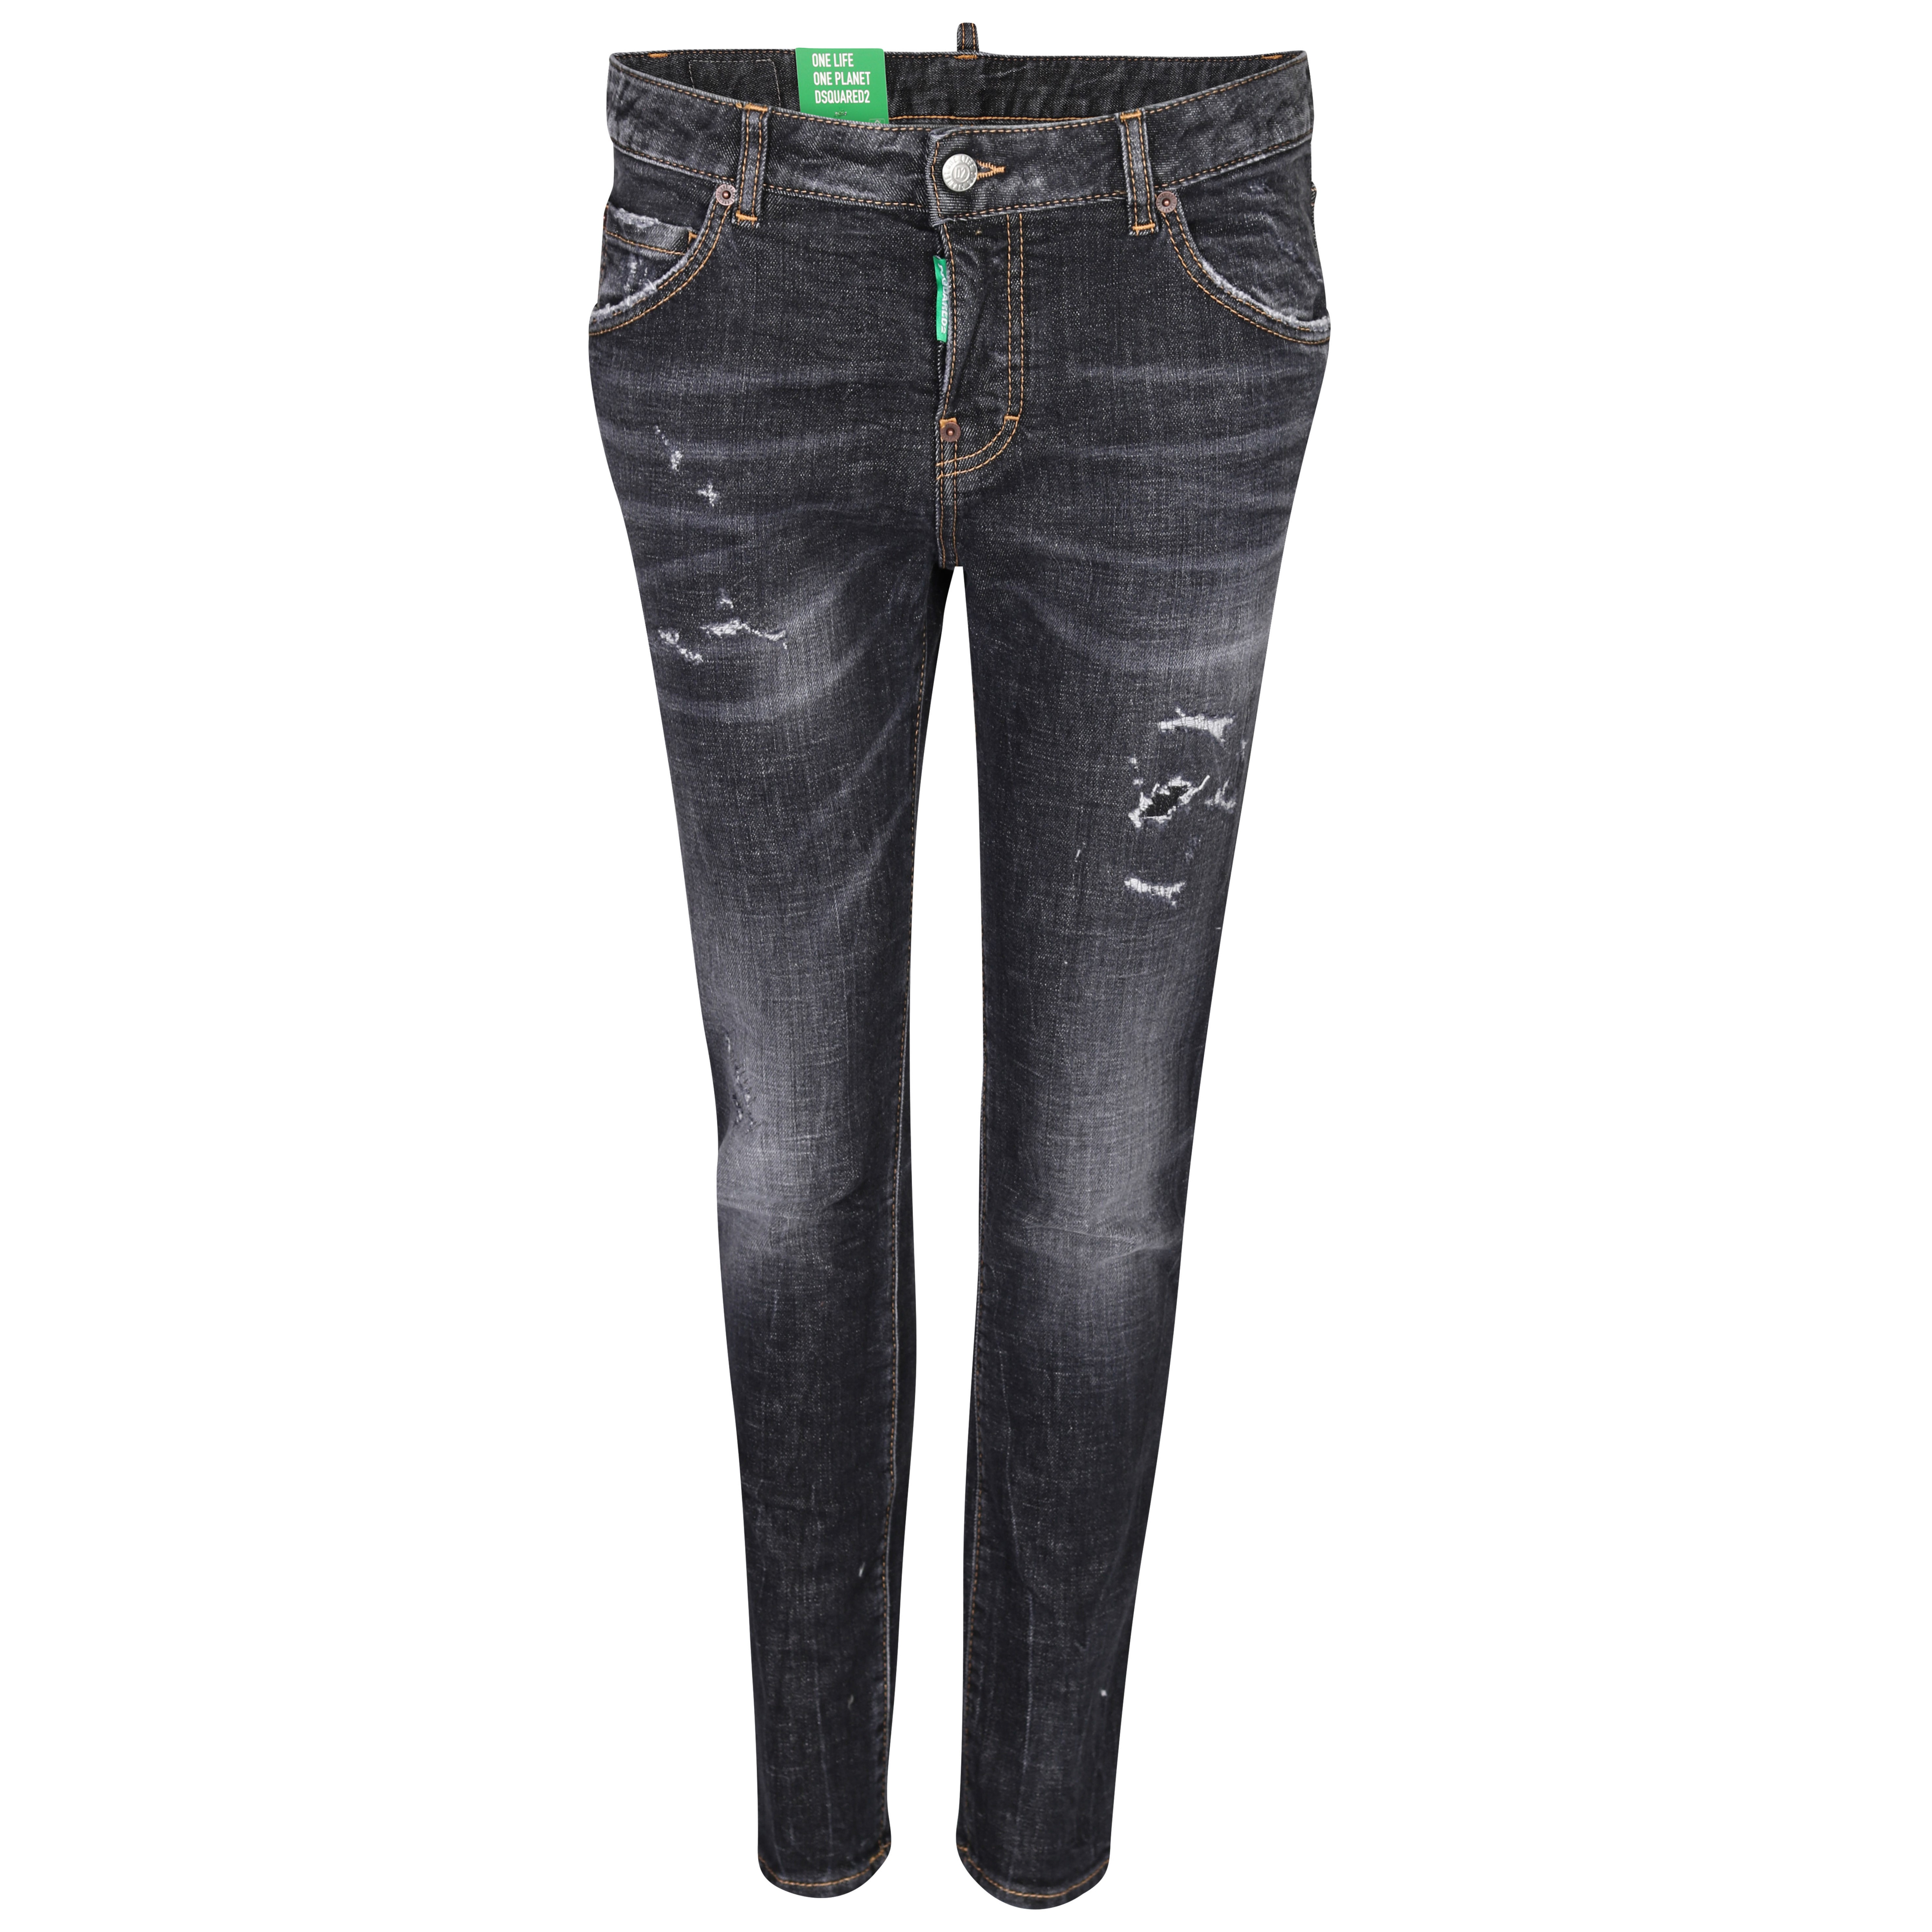 DSQUARED2 Green Label Cool Girl Jeans in Washed Black IT 44 / DE 38